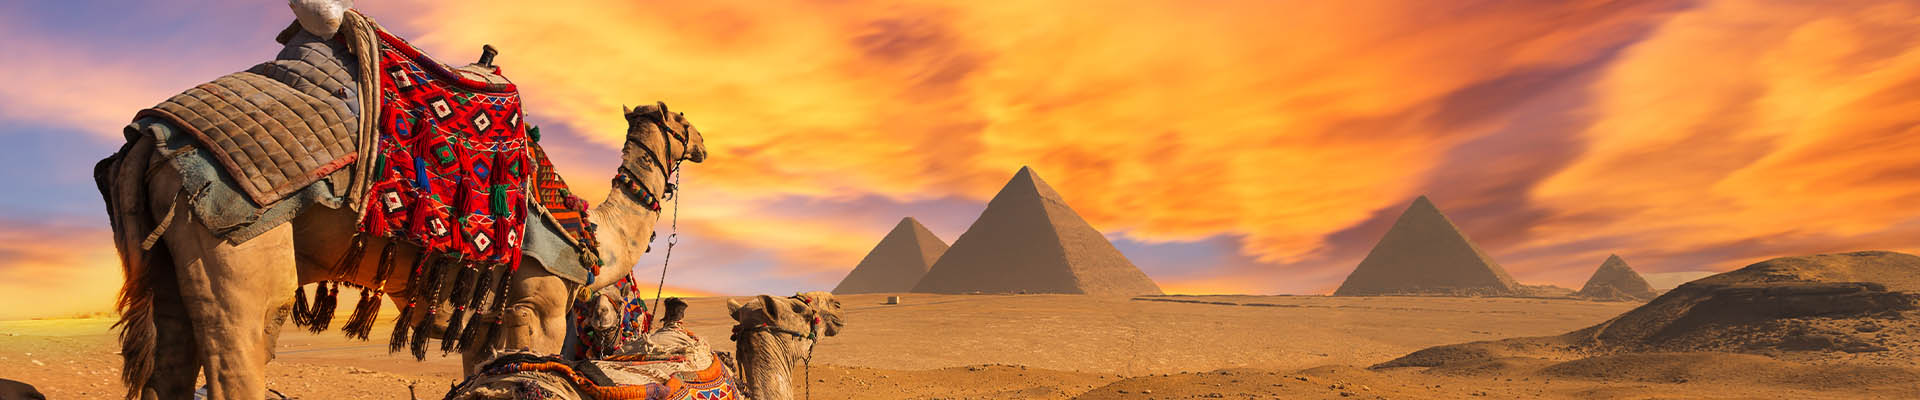 Israel and Egypt Tour with Luxor 14 Day Tour